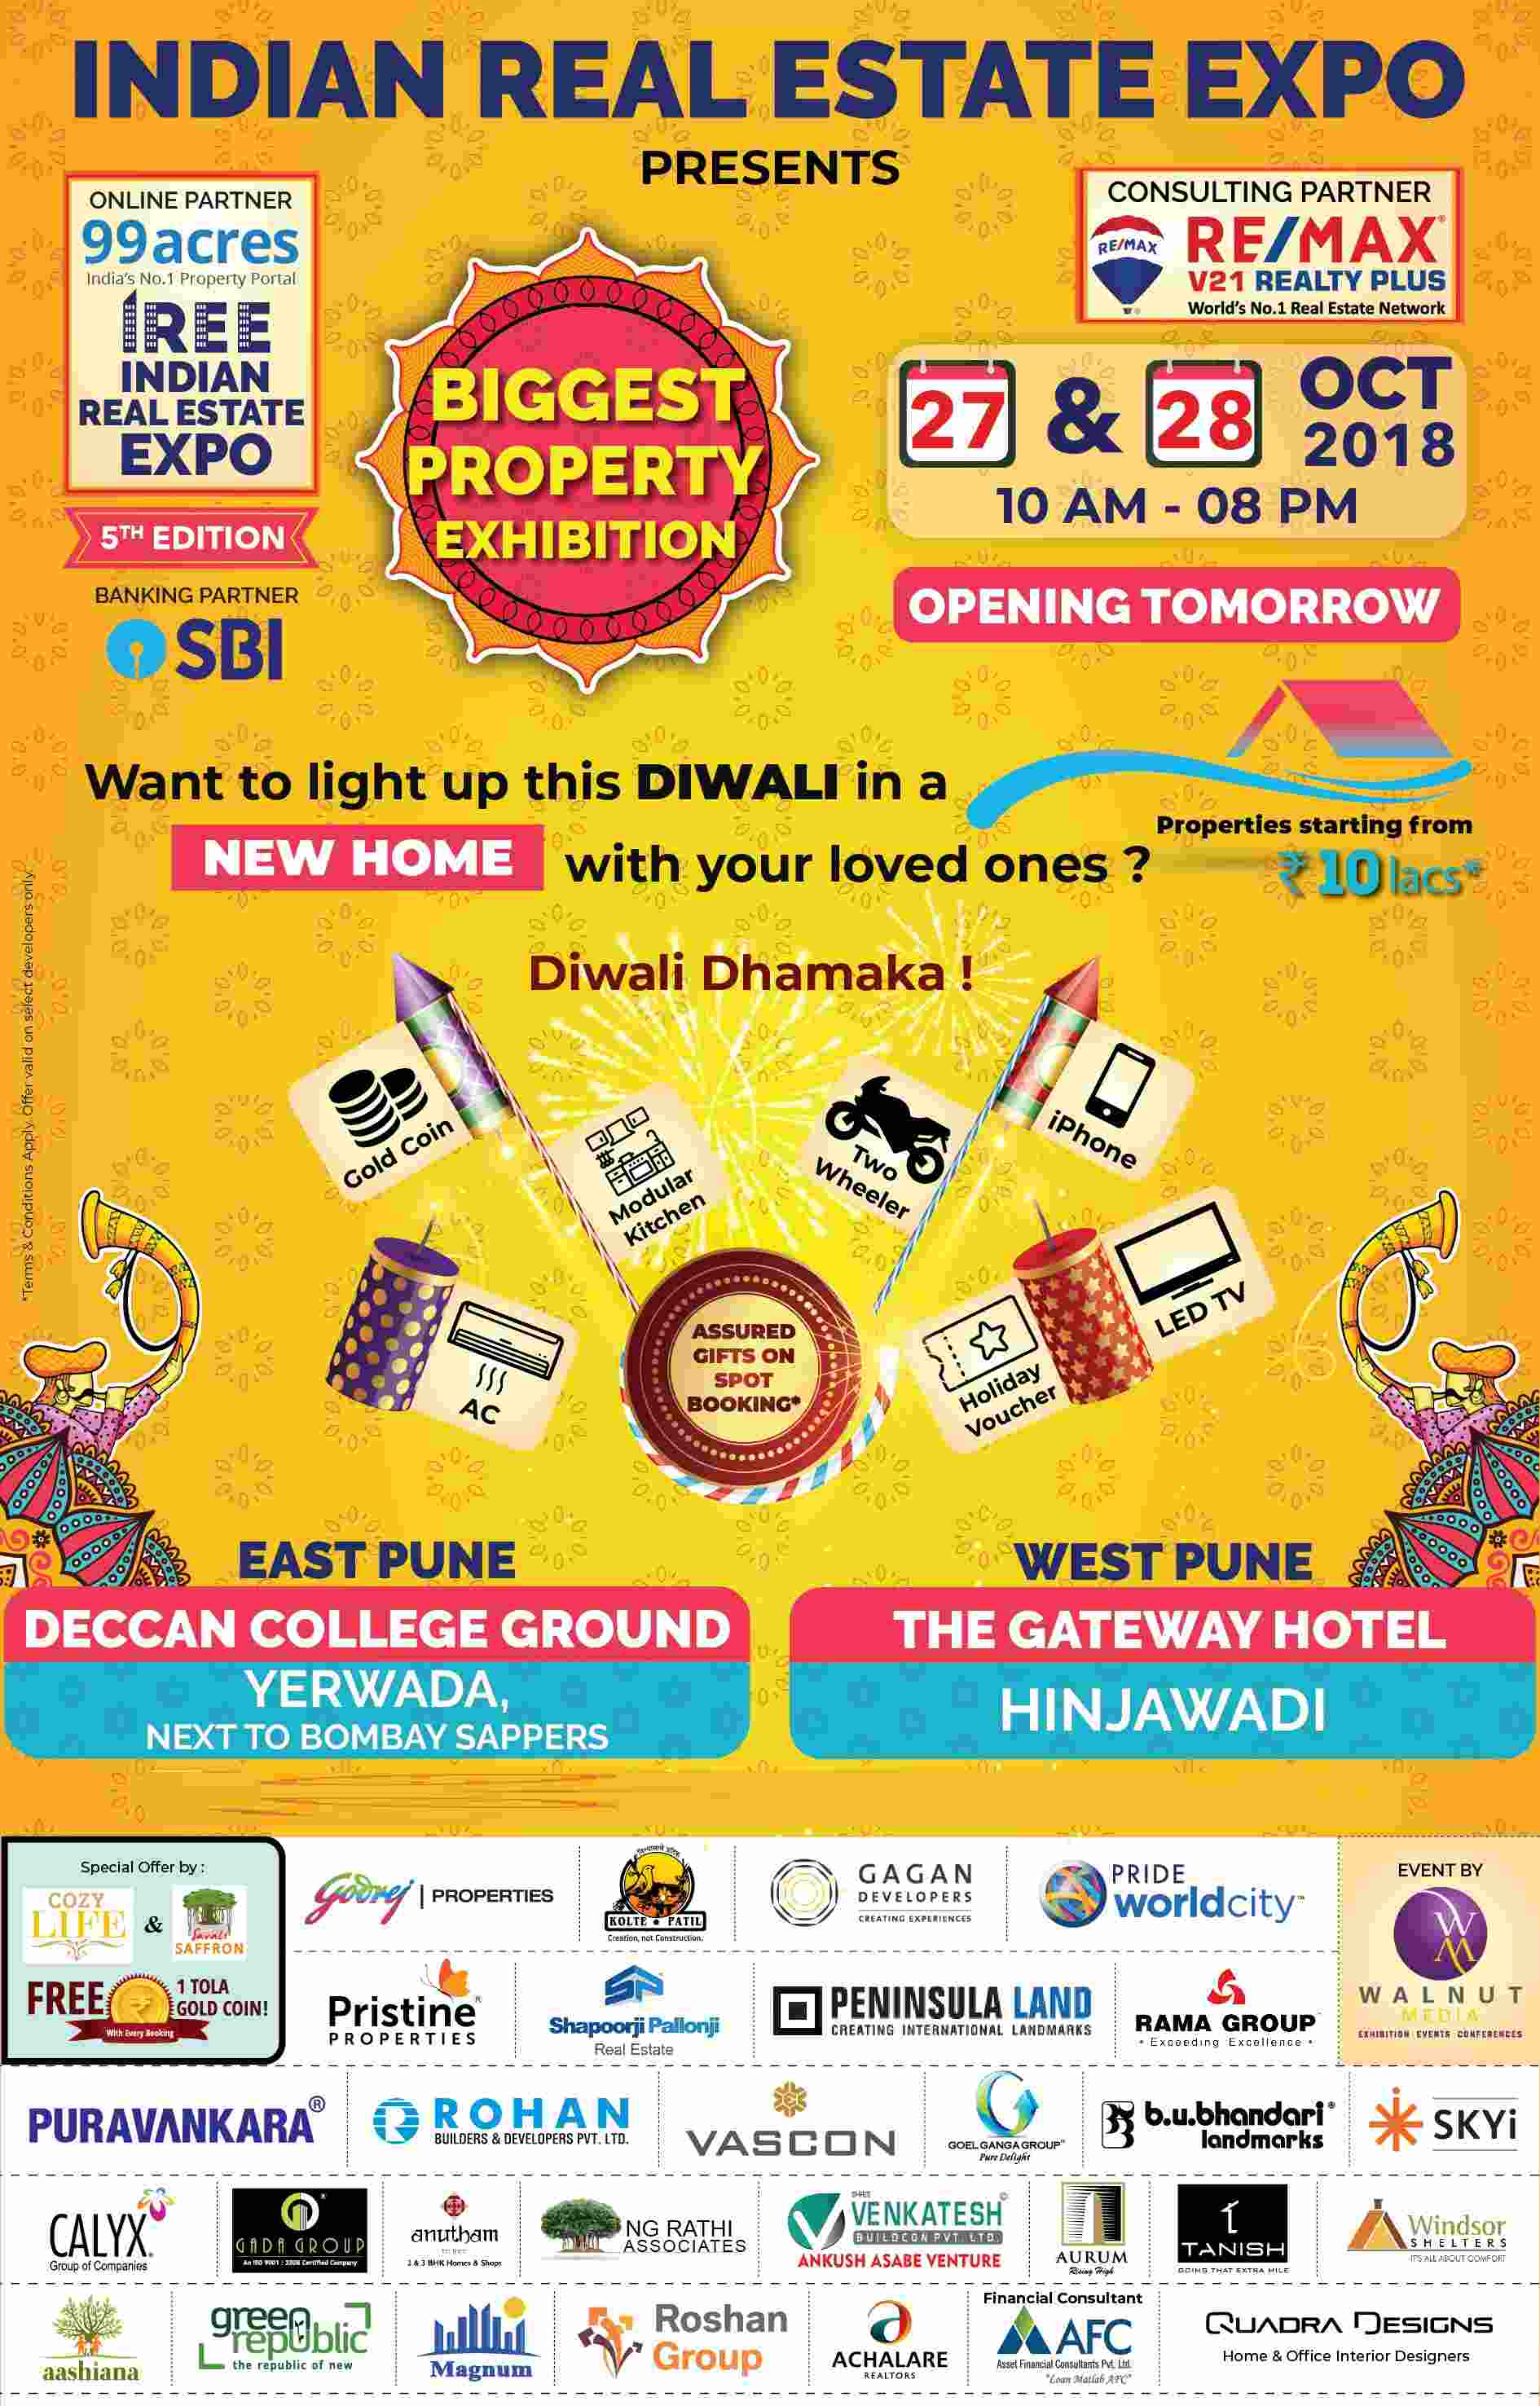 Indian Real Estate Expo Presents Biggest Property Exhibition in Pune, 2018 Update